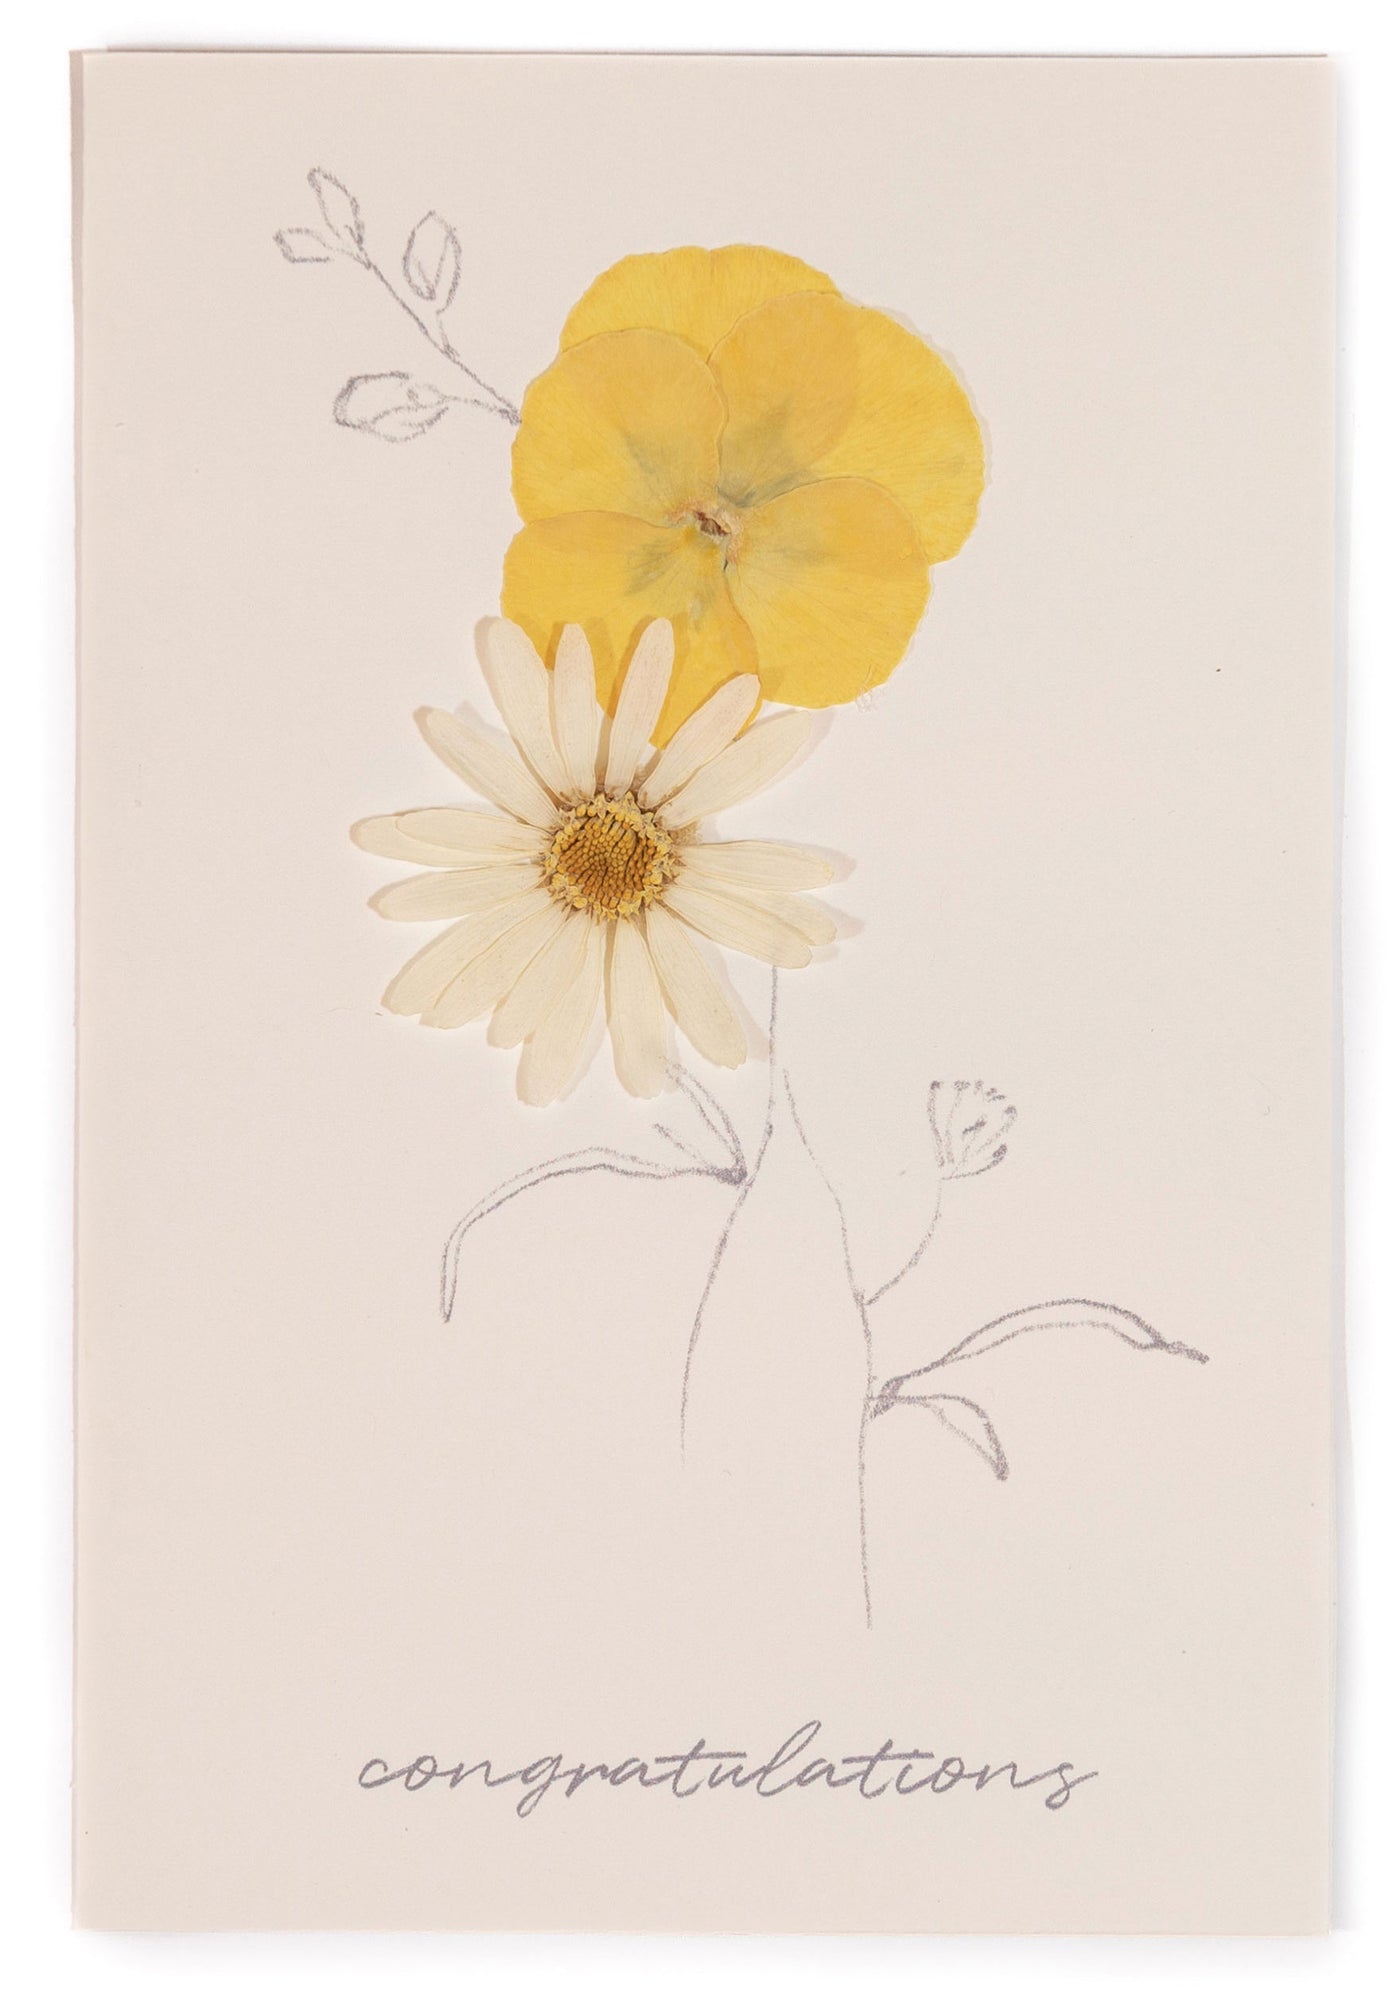 Congratulations - White Daisy Pressed Floral Stationery